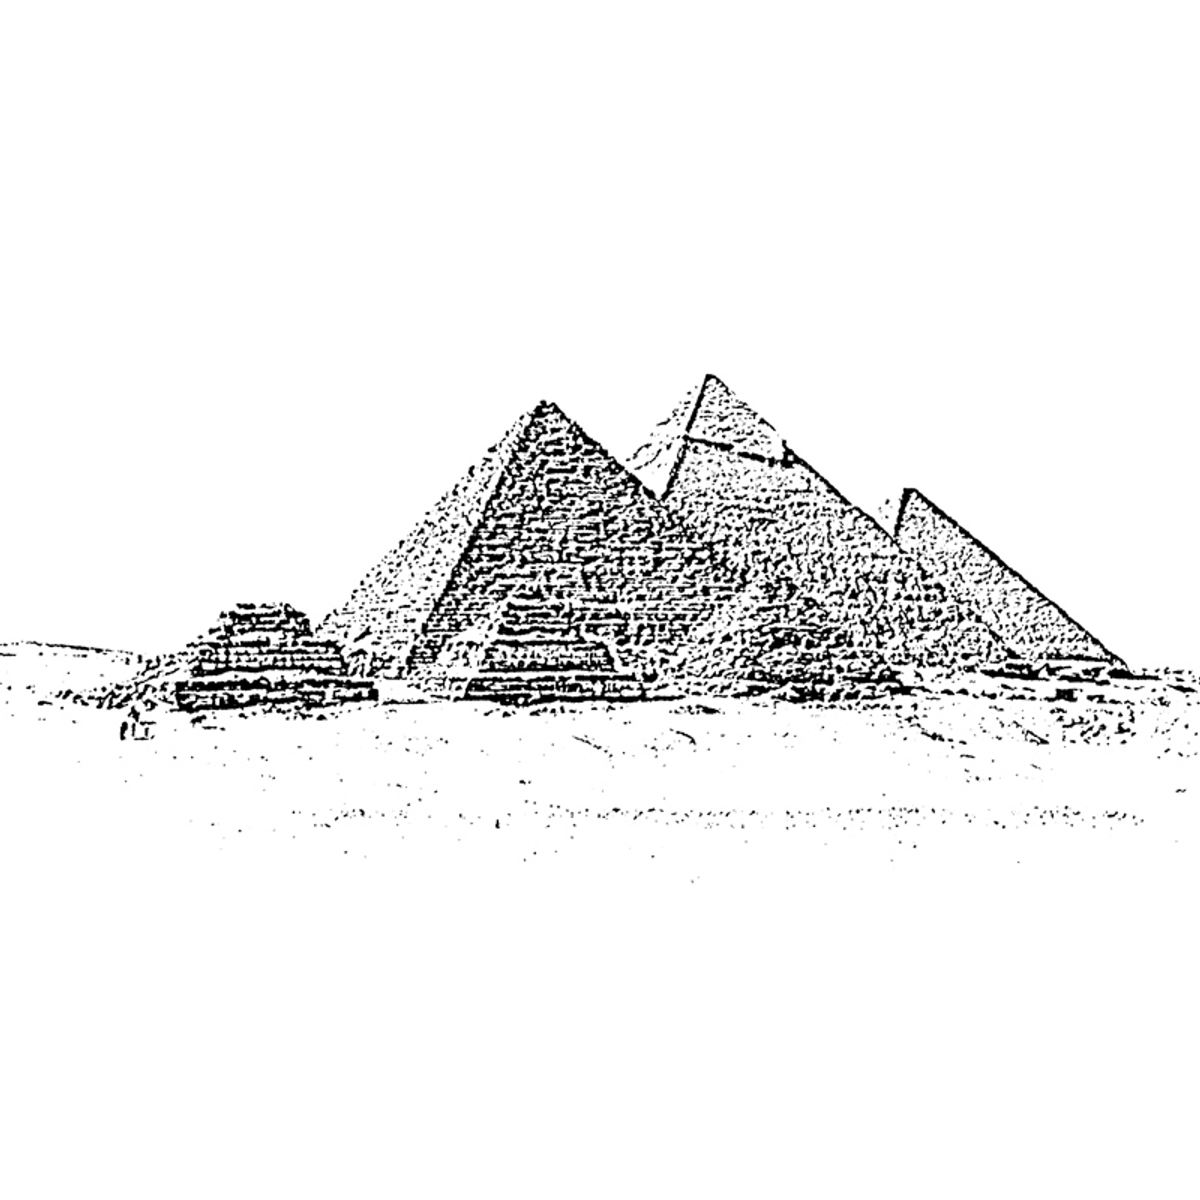 -2500 Construction of the pyramids of Cheops, Kephren and Mykerinos in Giza, Egypt